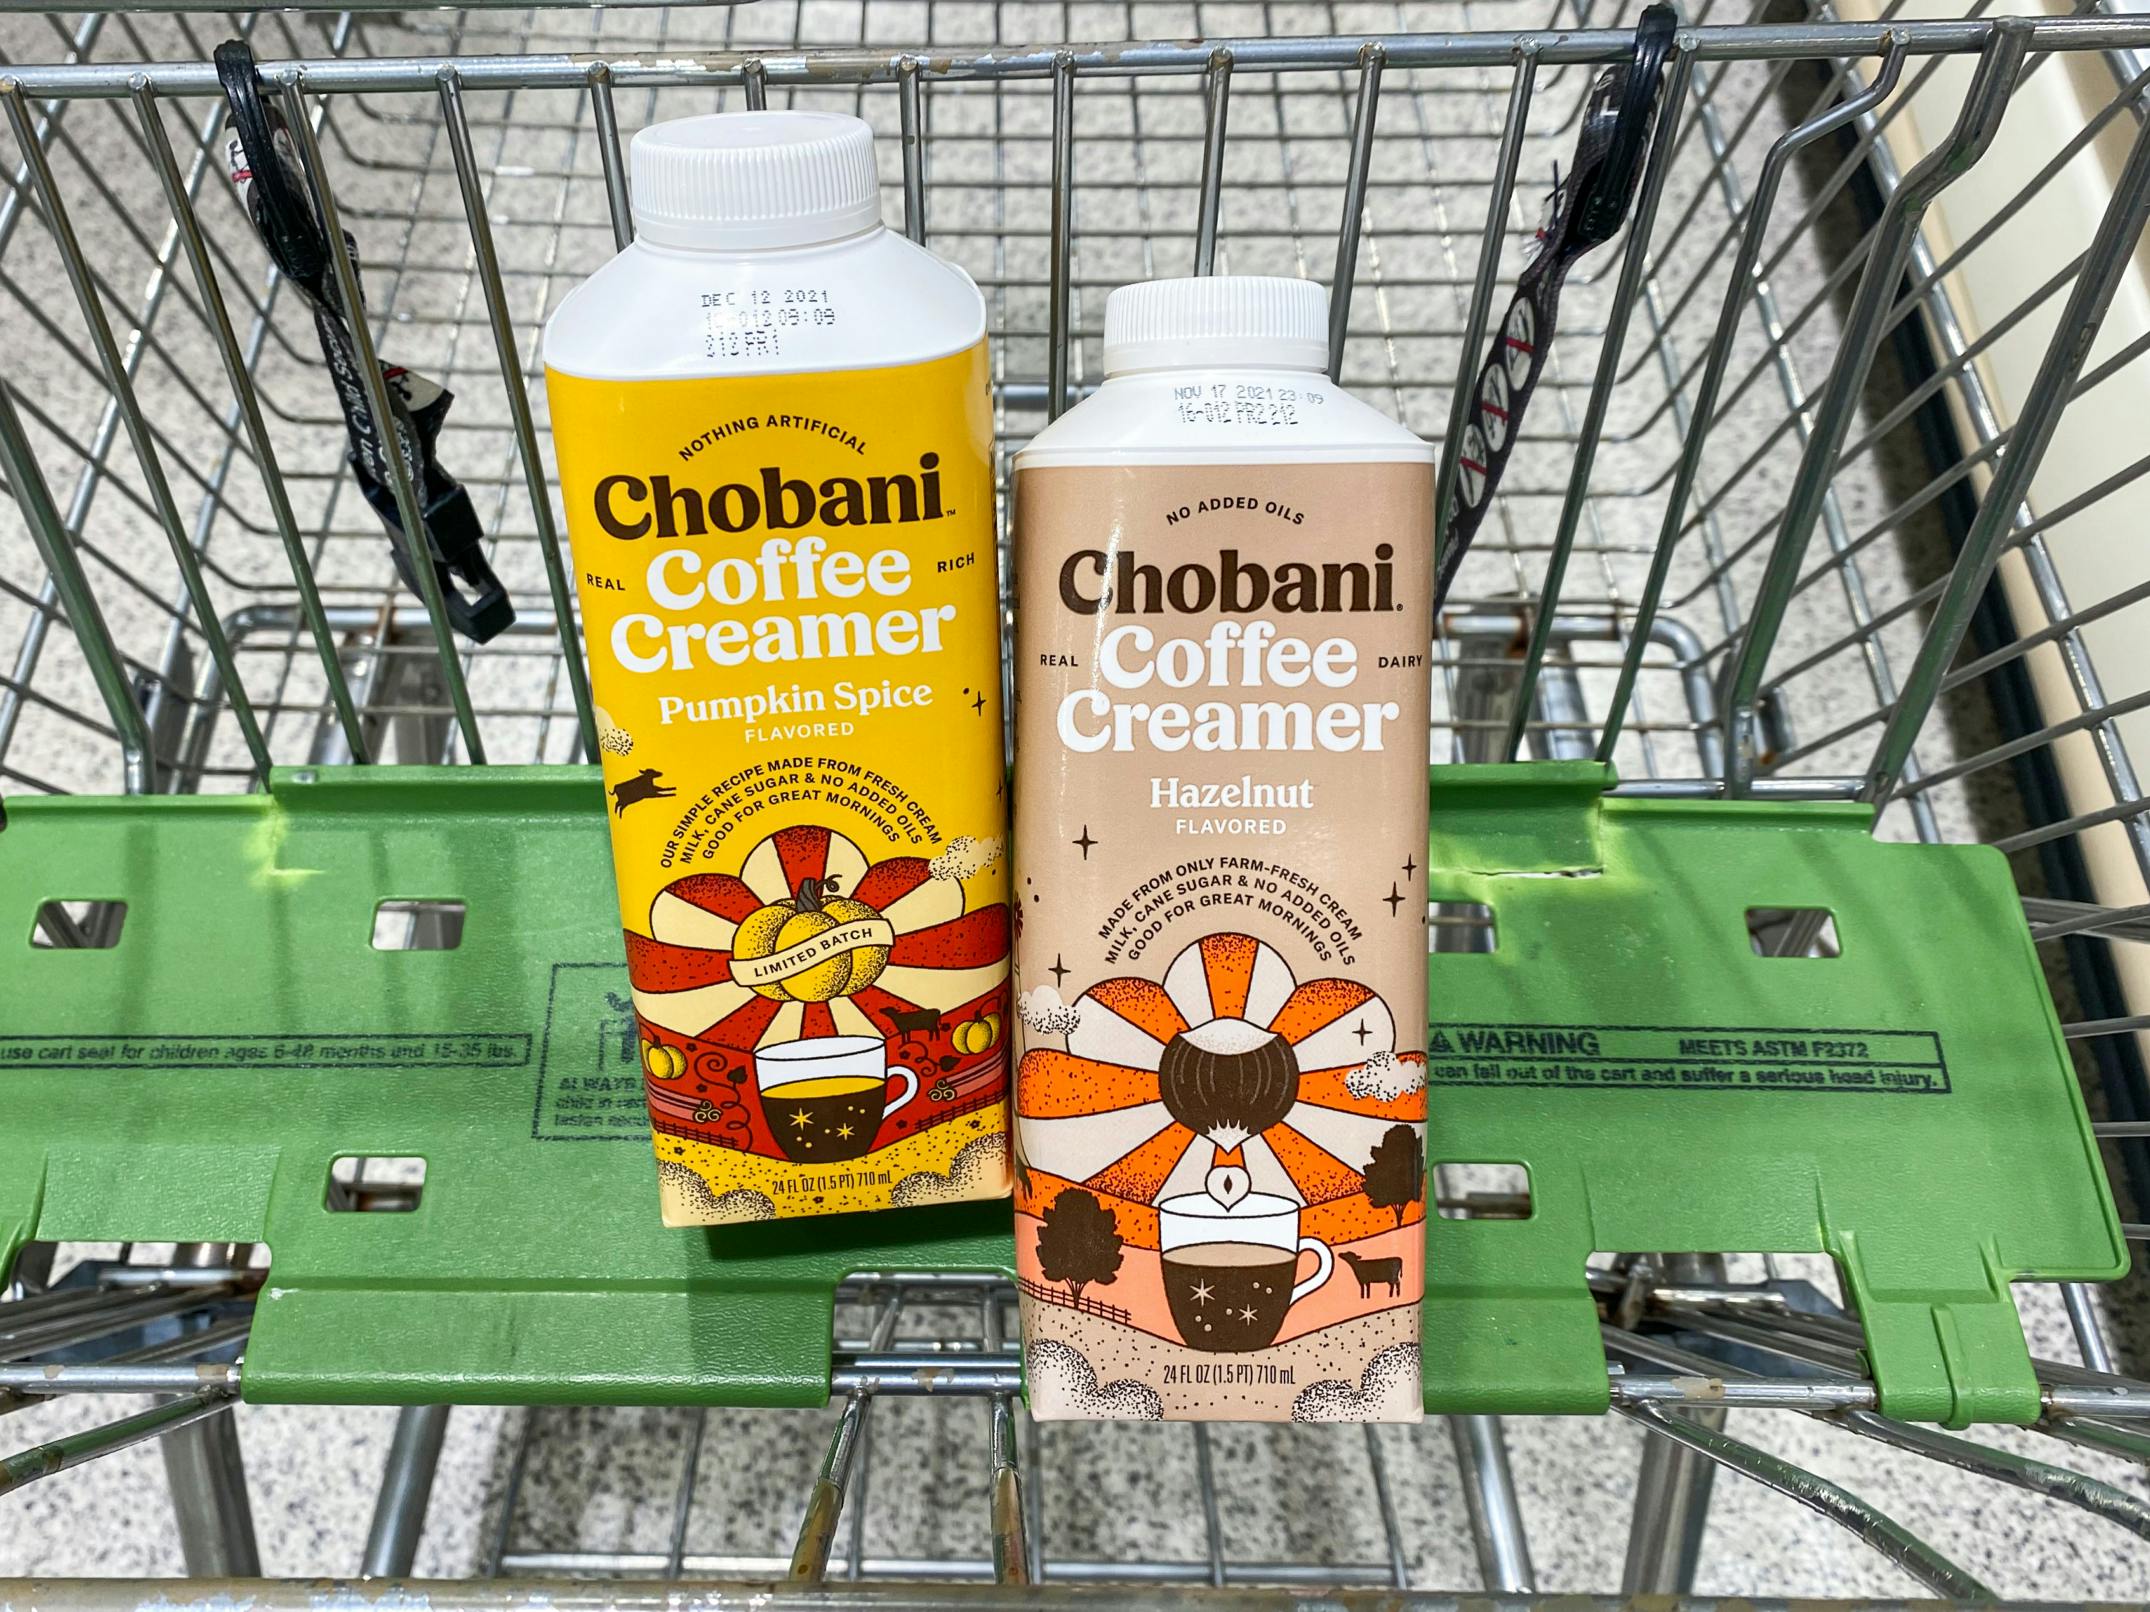 Two bottles of Chobani coffee creamer in a grocery cart